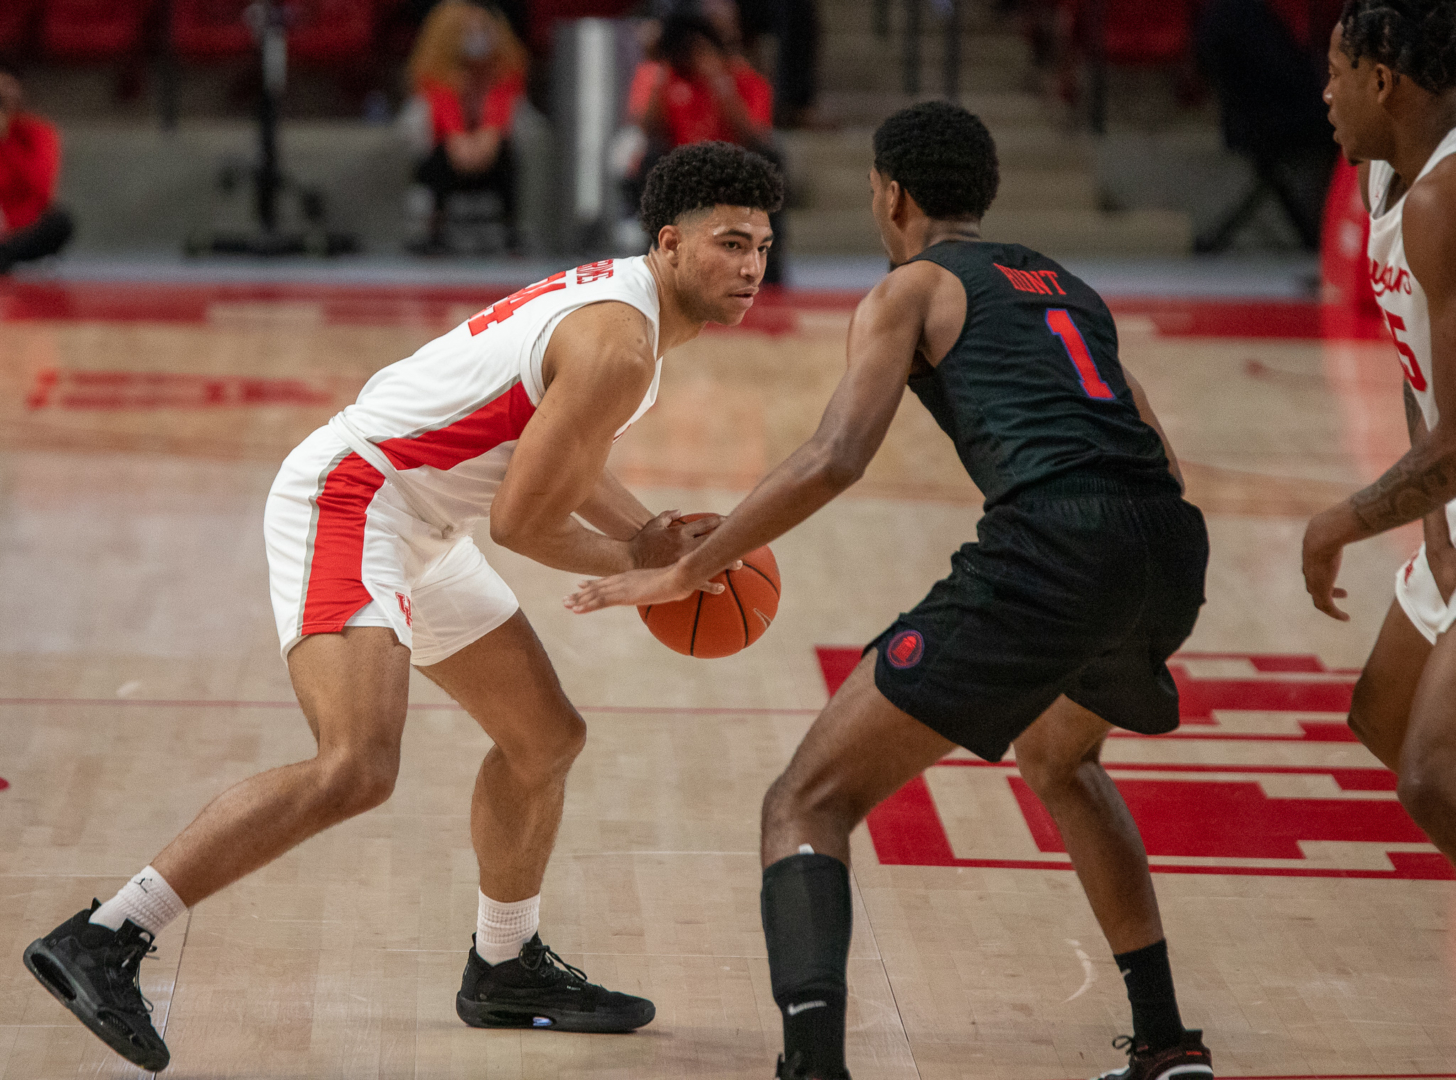 Houston guard Quentin Grimes holds the ball with an SMU defender in front of him during a game in the 2020-21 season at Fertitta Center. The UH men's basketball team was announced as a two seed in the NCAA's in-season bracket show on Saturday. | Andy Yanez/The Cougar